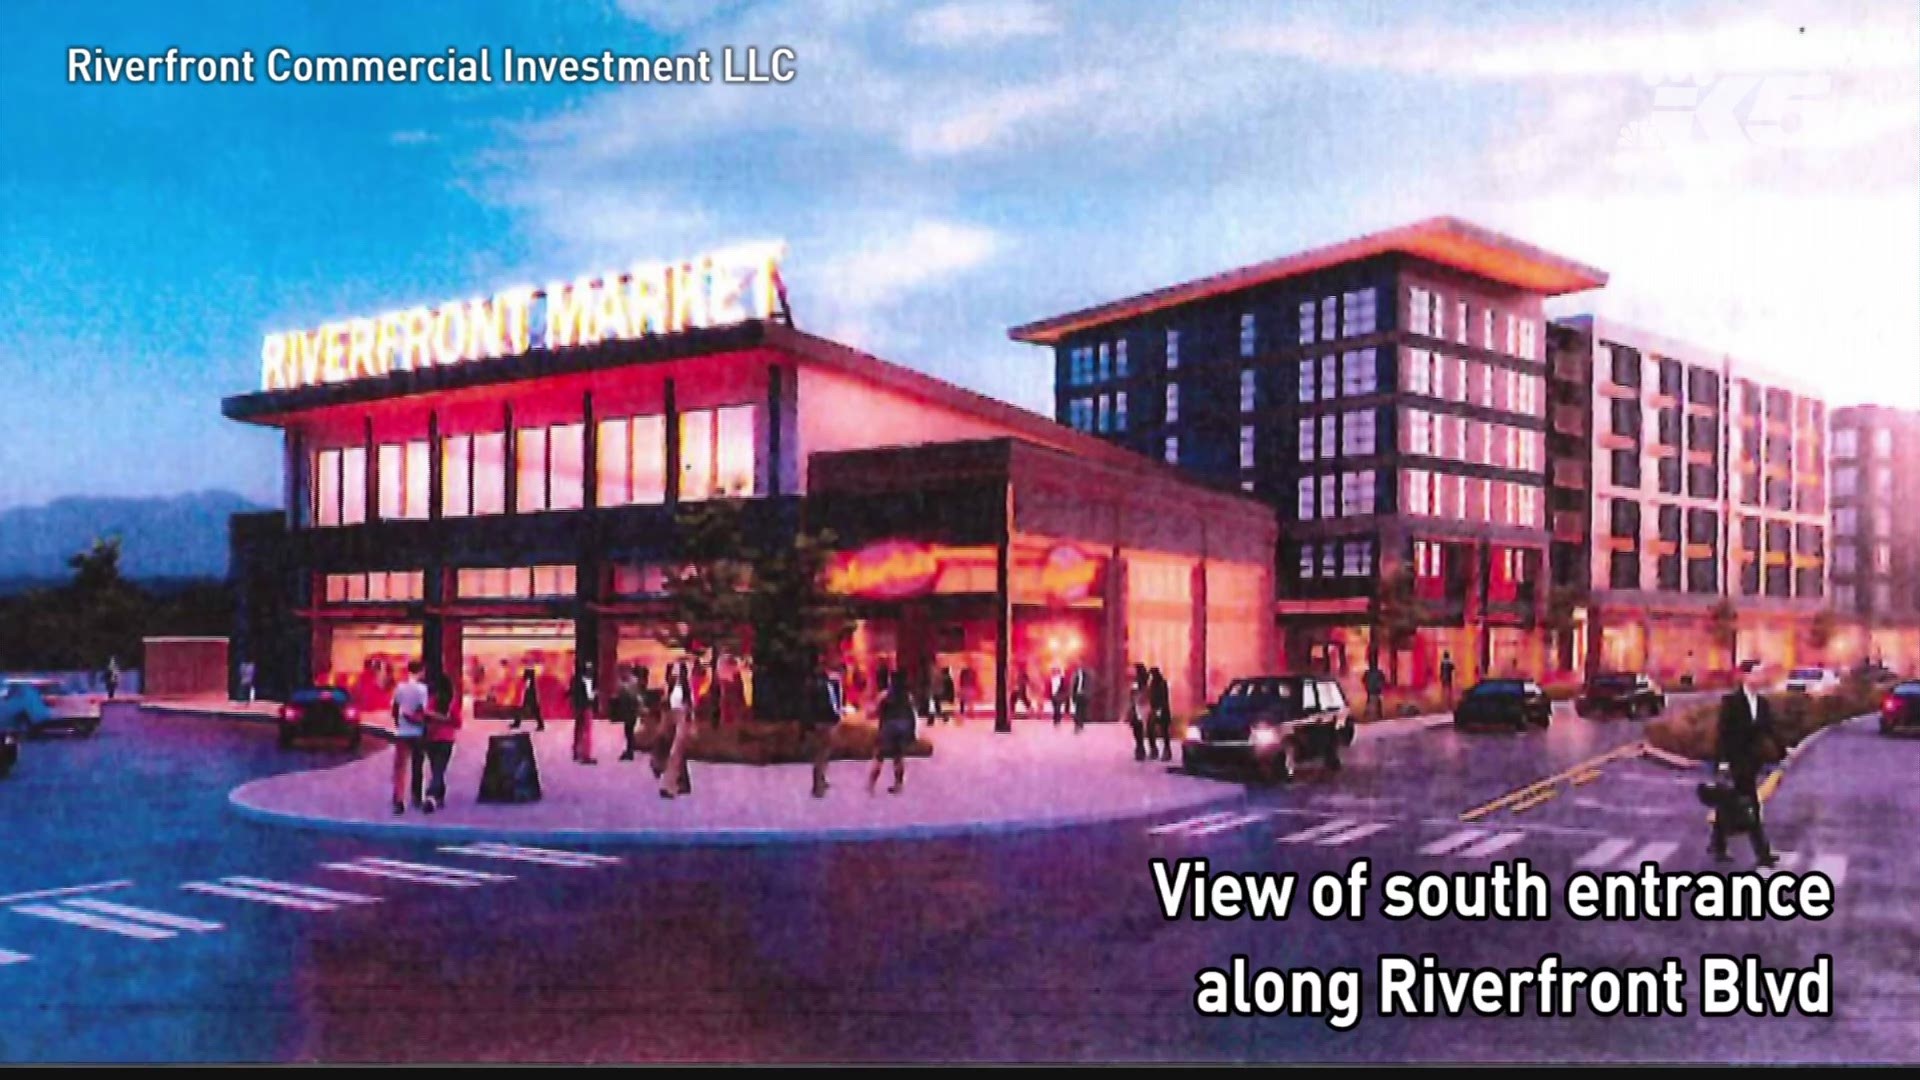 A planned development on Everett's riverfront will include 230,000 square-feet of retail space, including a movie theater and specialty grocery store, 125,000 square feet of office space, 250 hotel rooms, and 1,250 condo or multi-family home units.